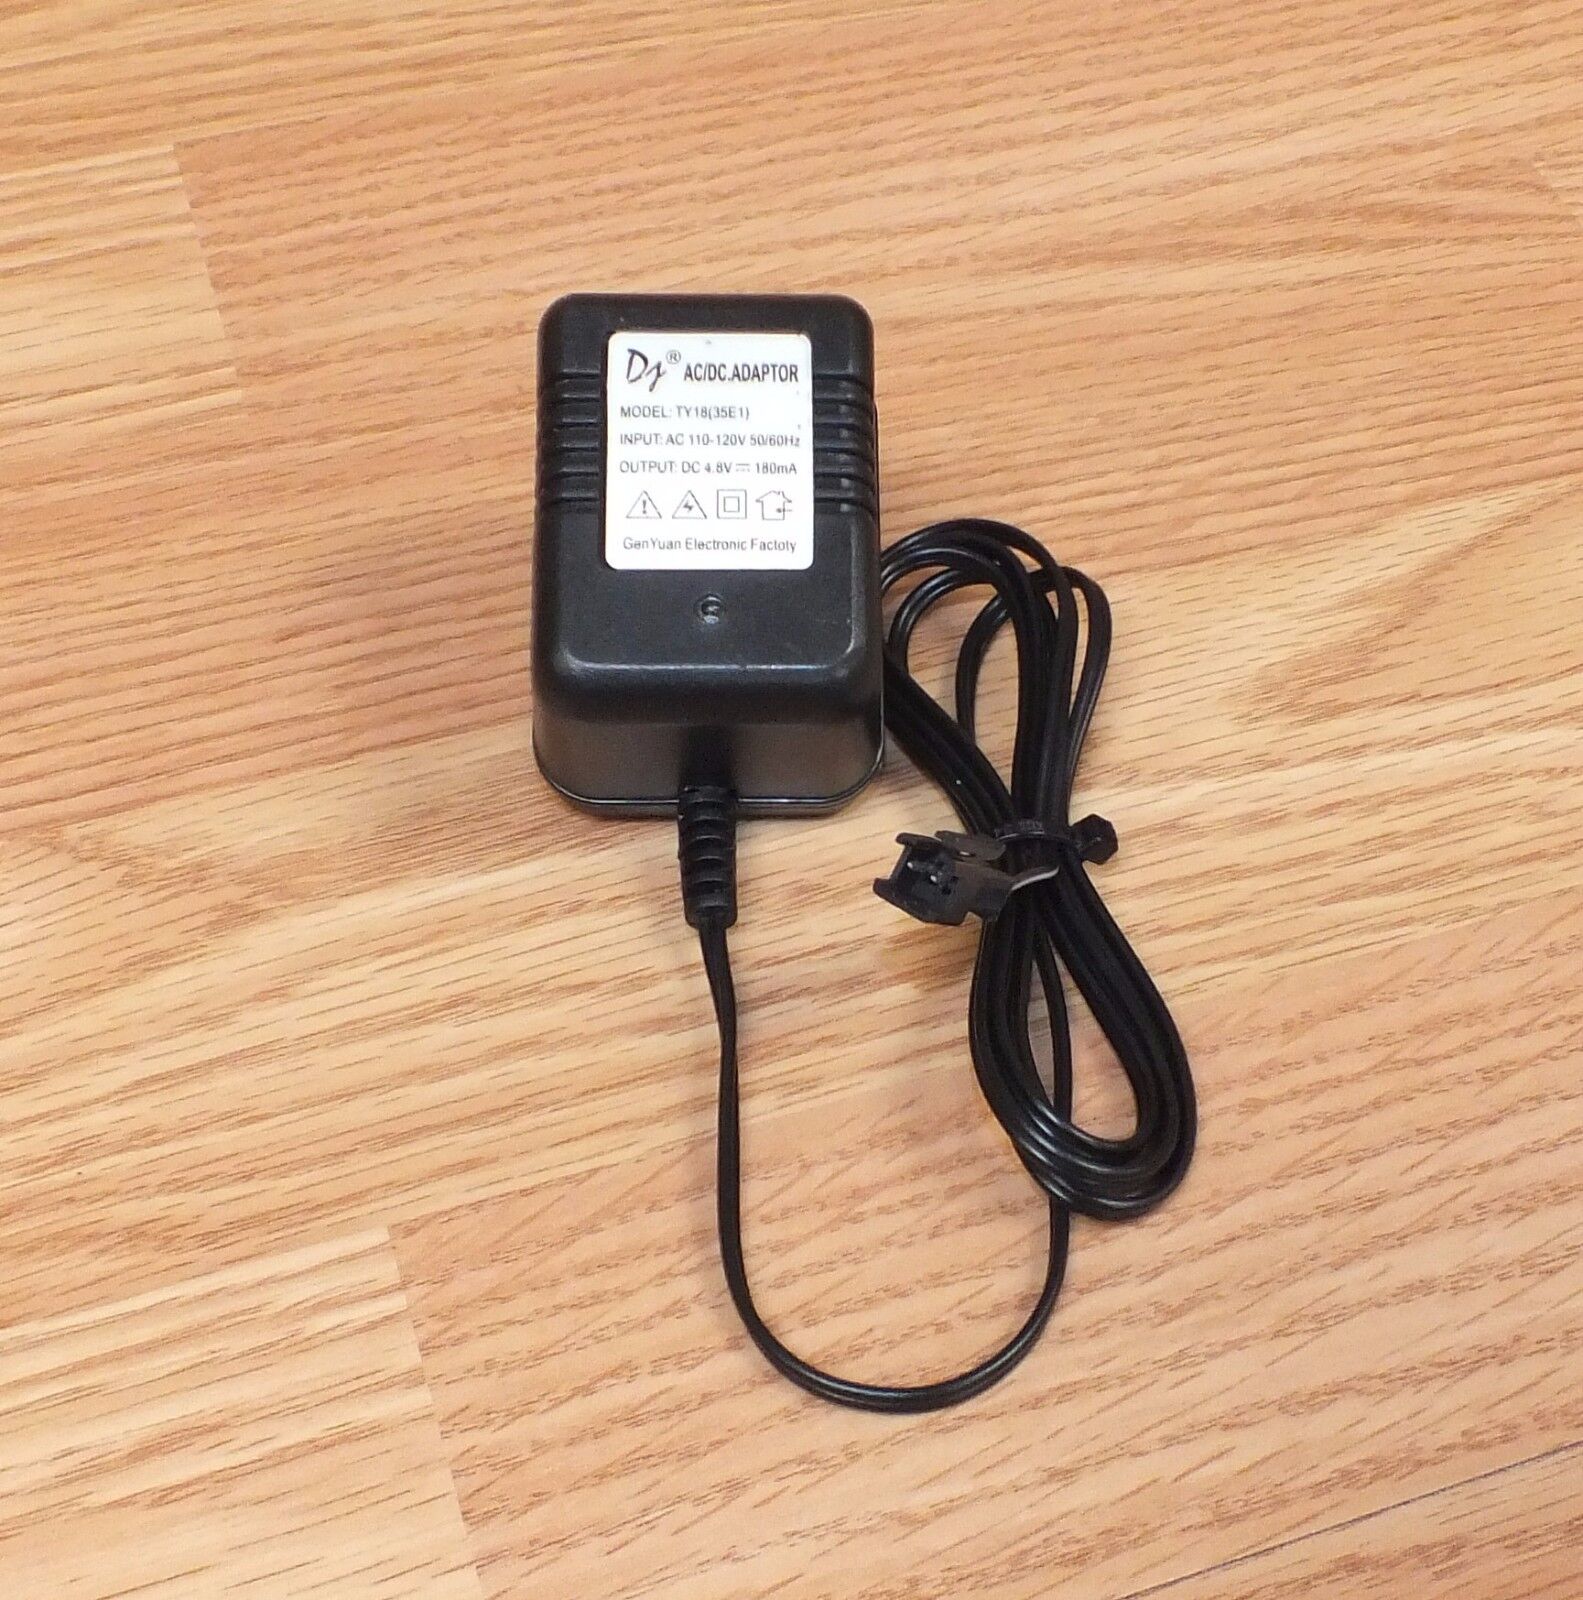 GenYuan TY1835E1 Electronic Factory Black AC 12V Free shipping 67% OFF of fixed price 18 DC Adapter